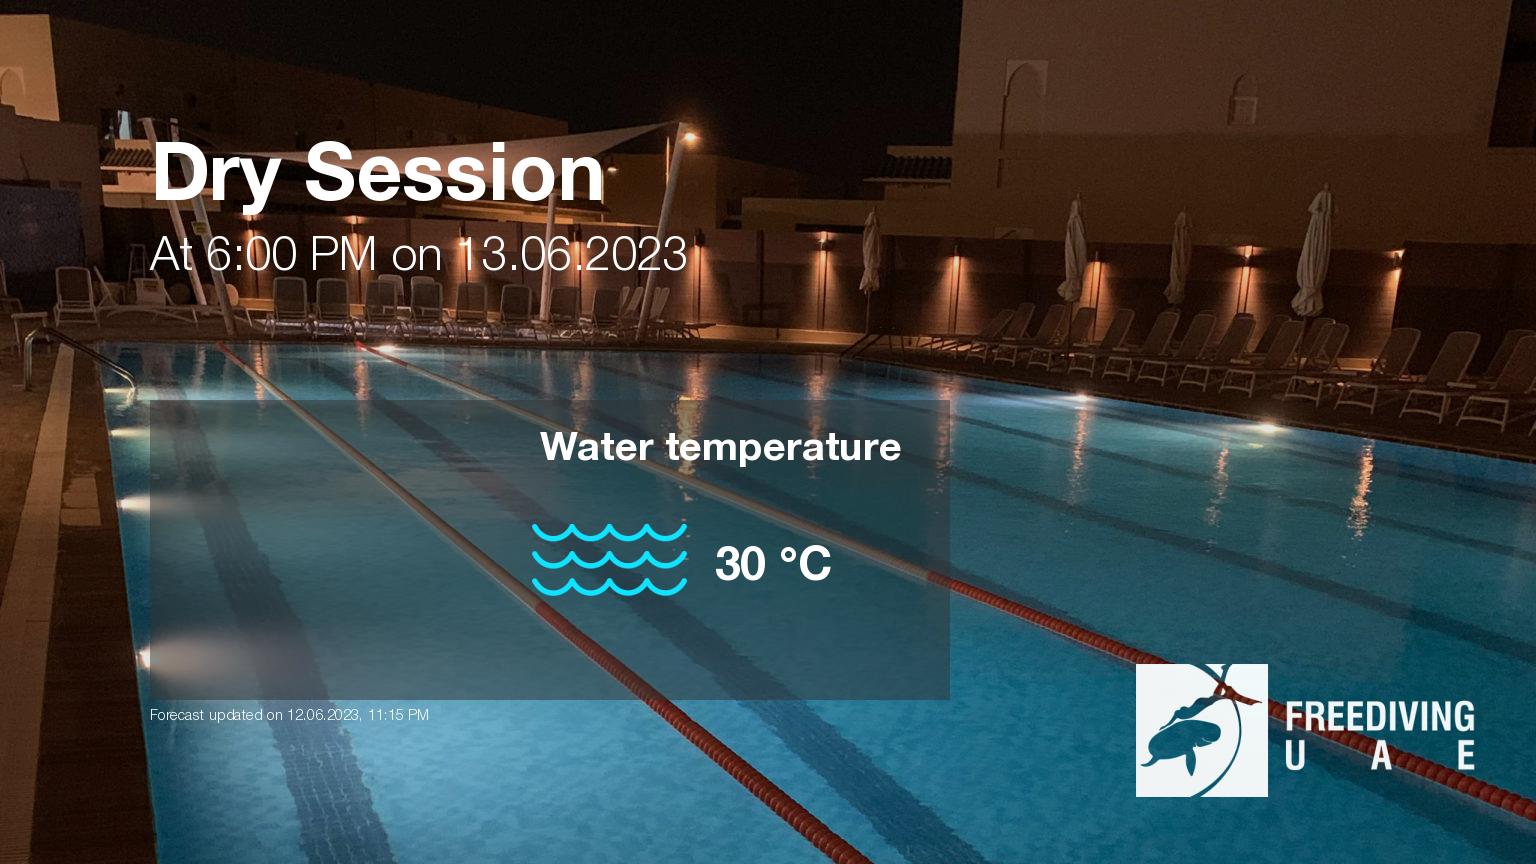 Expected weather during Dry Session on Tue, Jun 13, at 6:00 PM